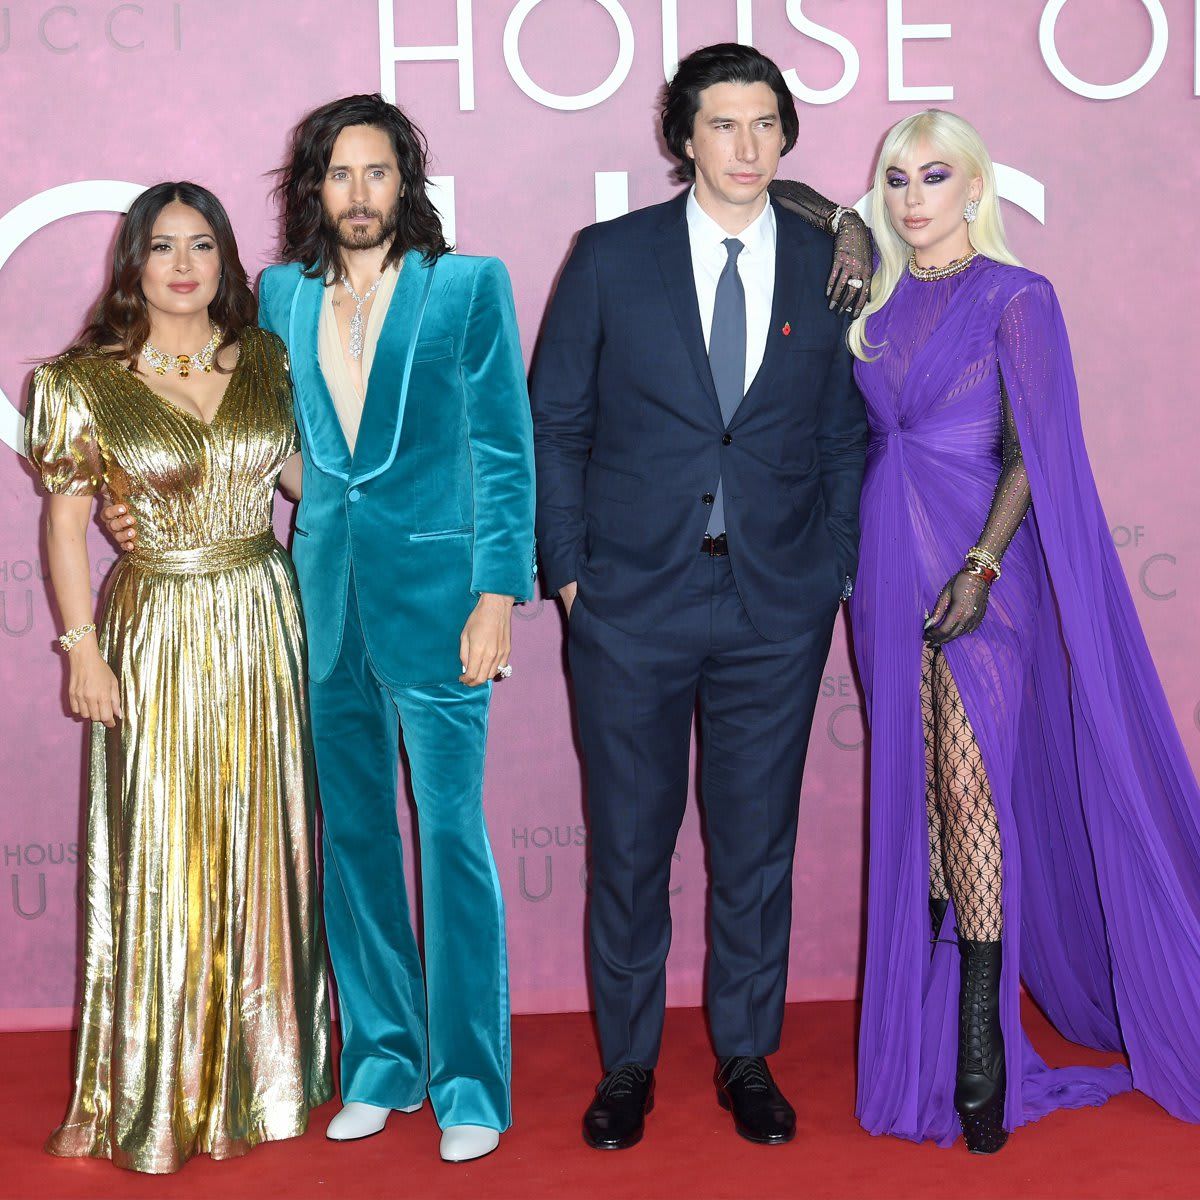 We can’t stop looking at ‘House Of Gucci’ stars Salma Hayek and Lady Gaga at the U.K movie premiere